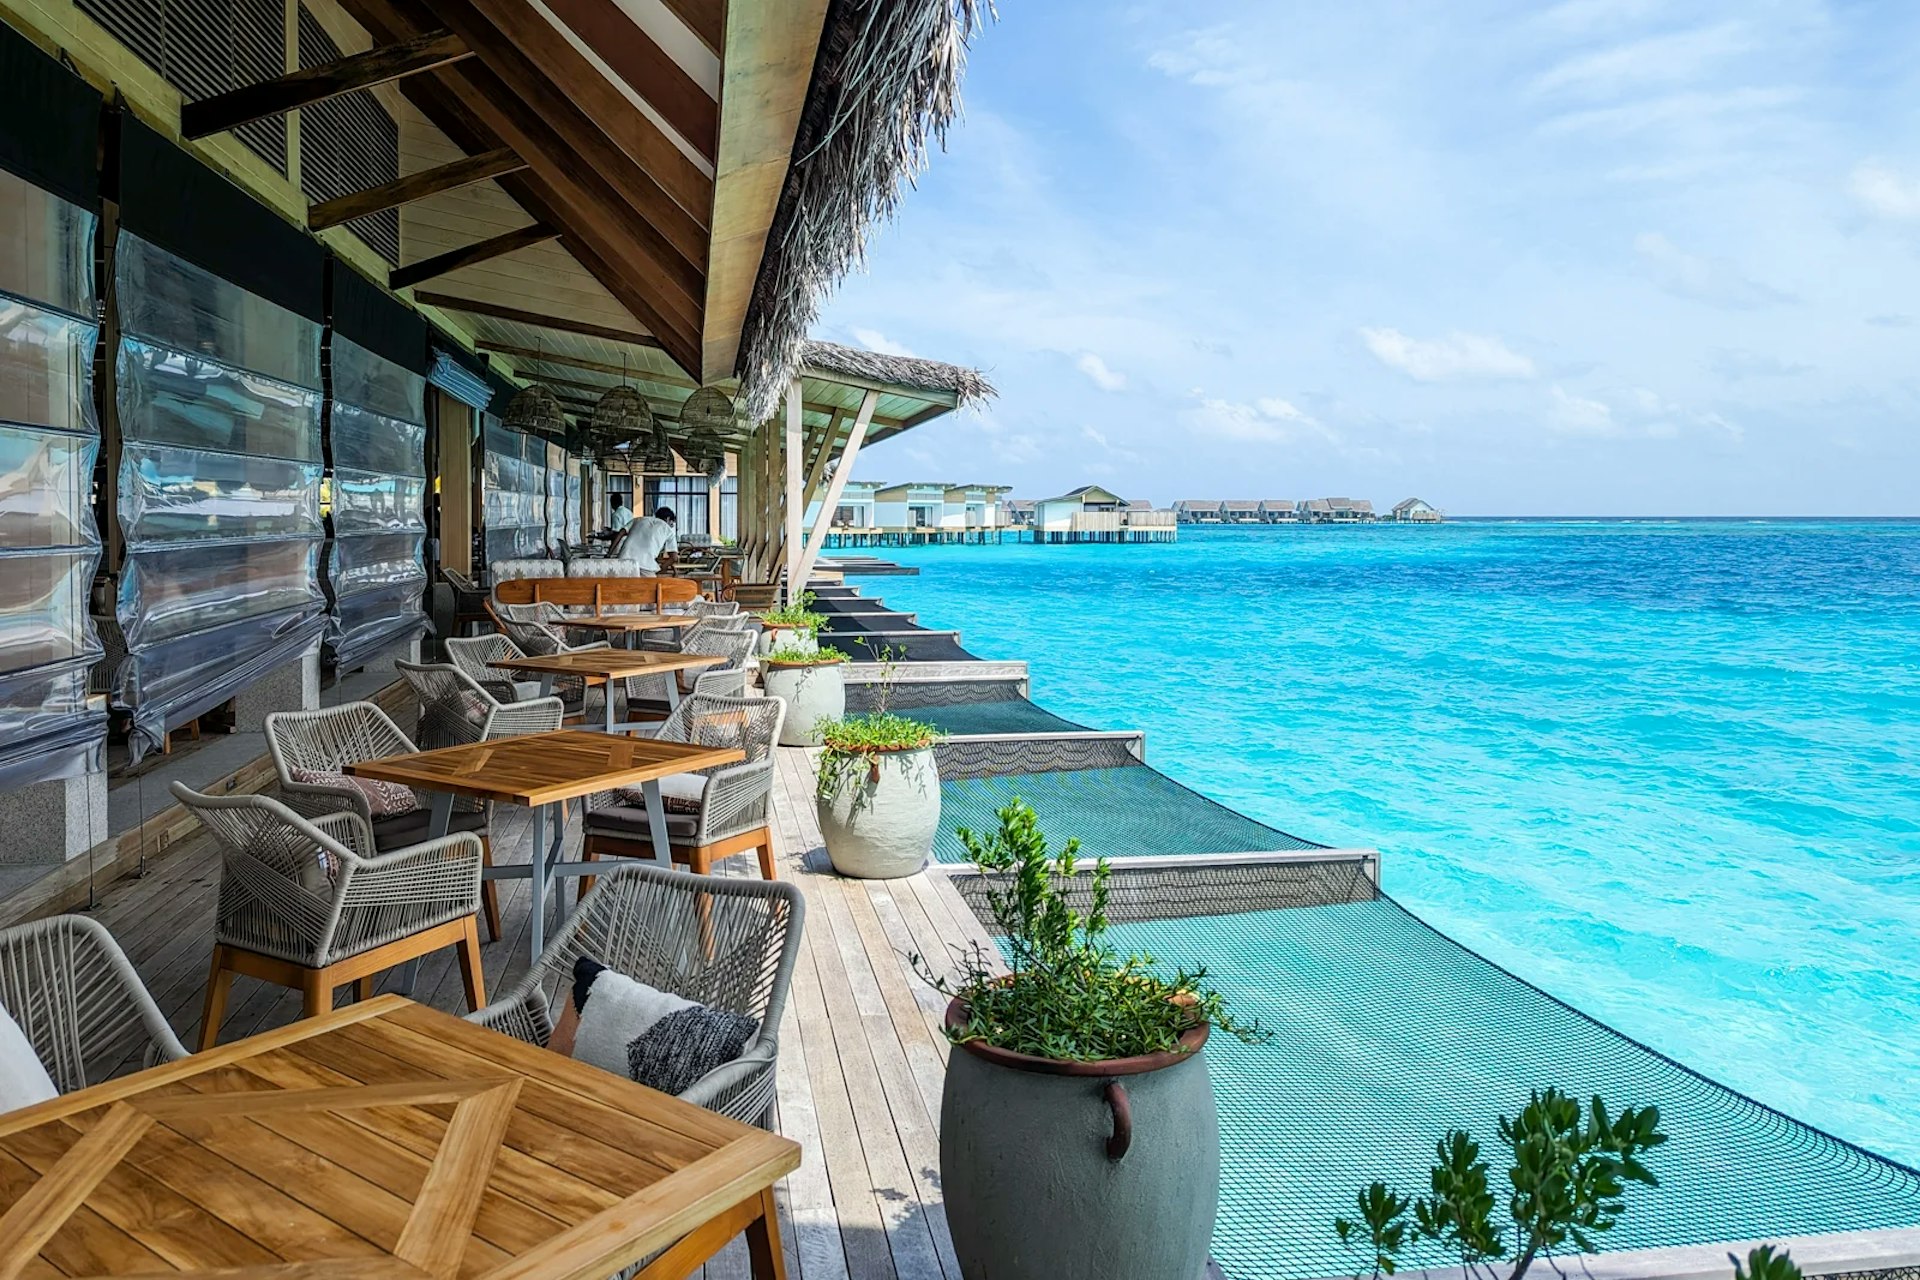 The view from one of the restaurants at the Hilton Maldives Amingiri Resort & Spa